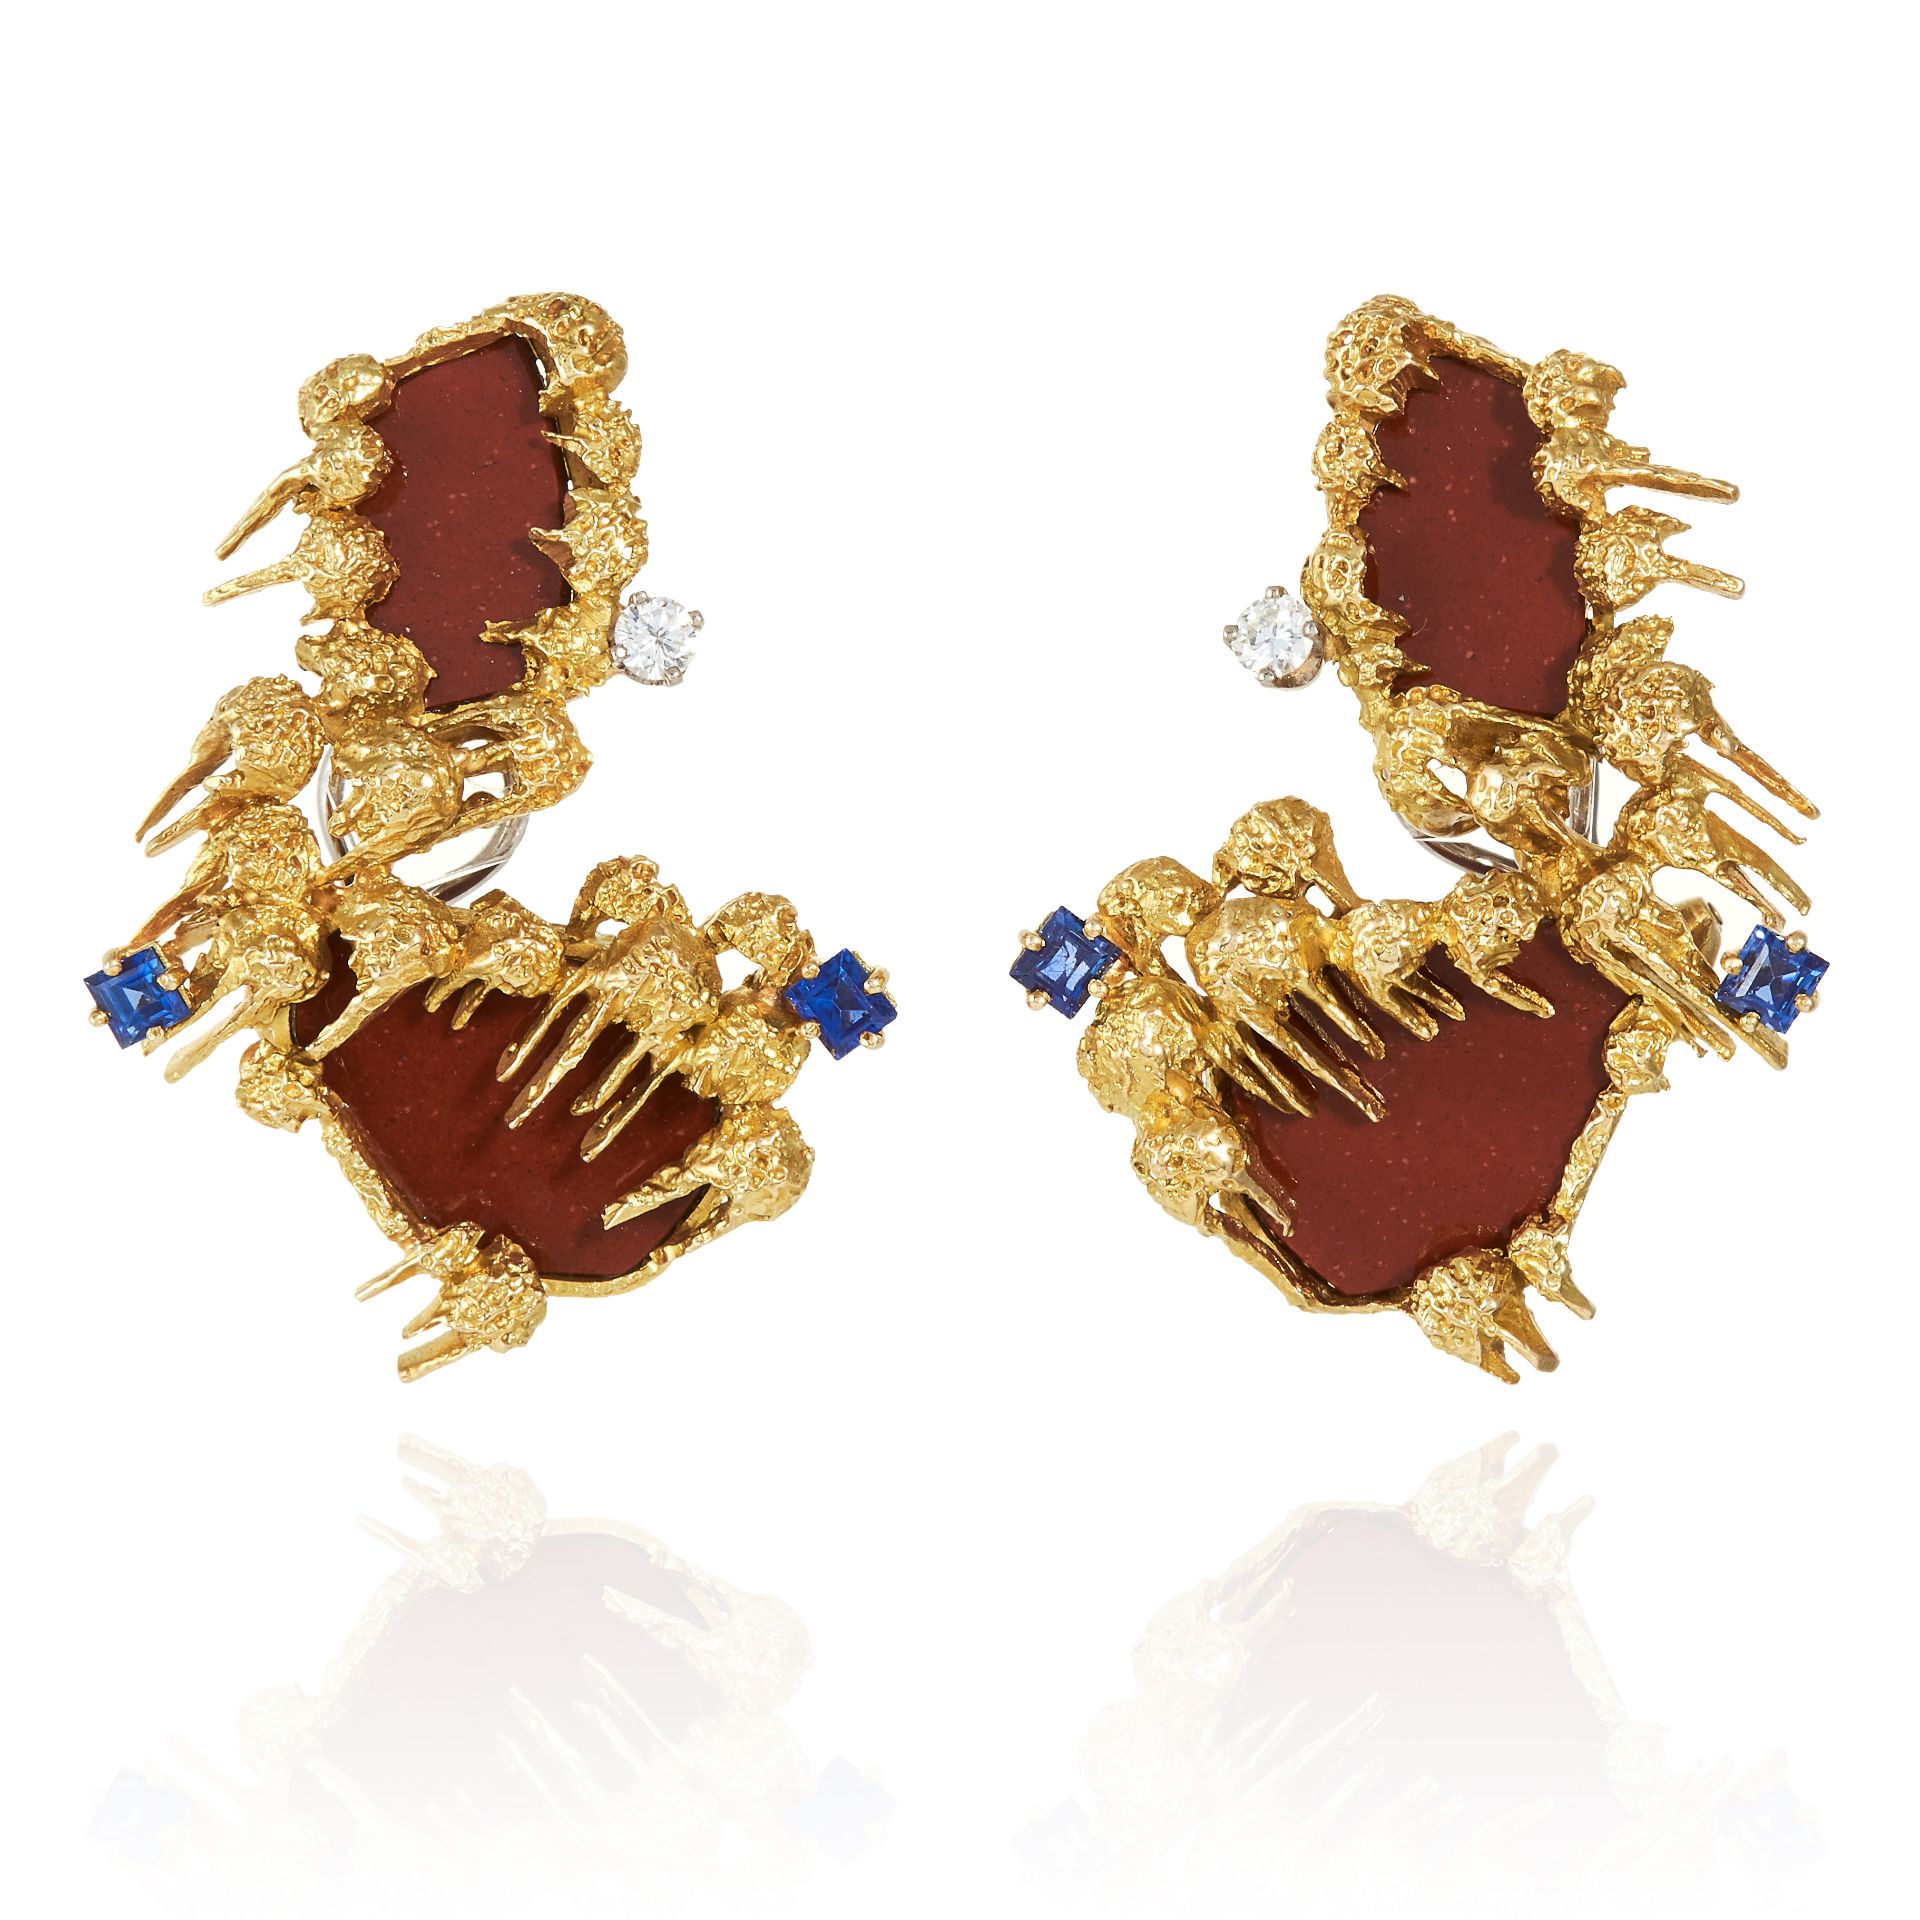 A PAIR OF SAPPHIRE, DIAMOND AND AGATE EARRINGS, GUBELIN, CIRCA 1970 in 18ct yellow gold, designed in